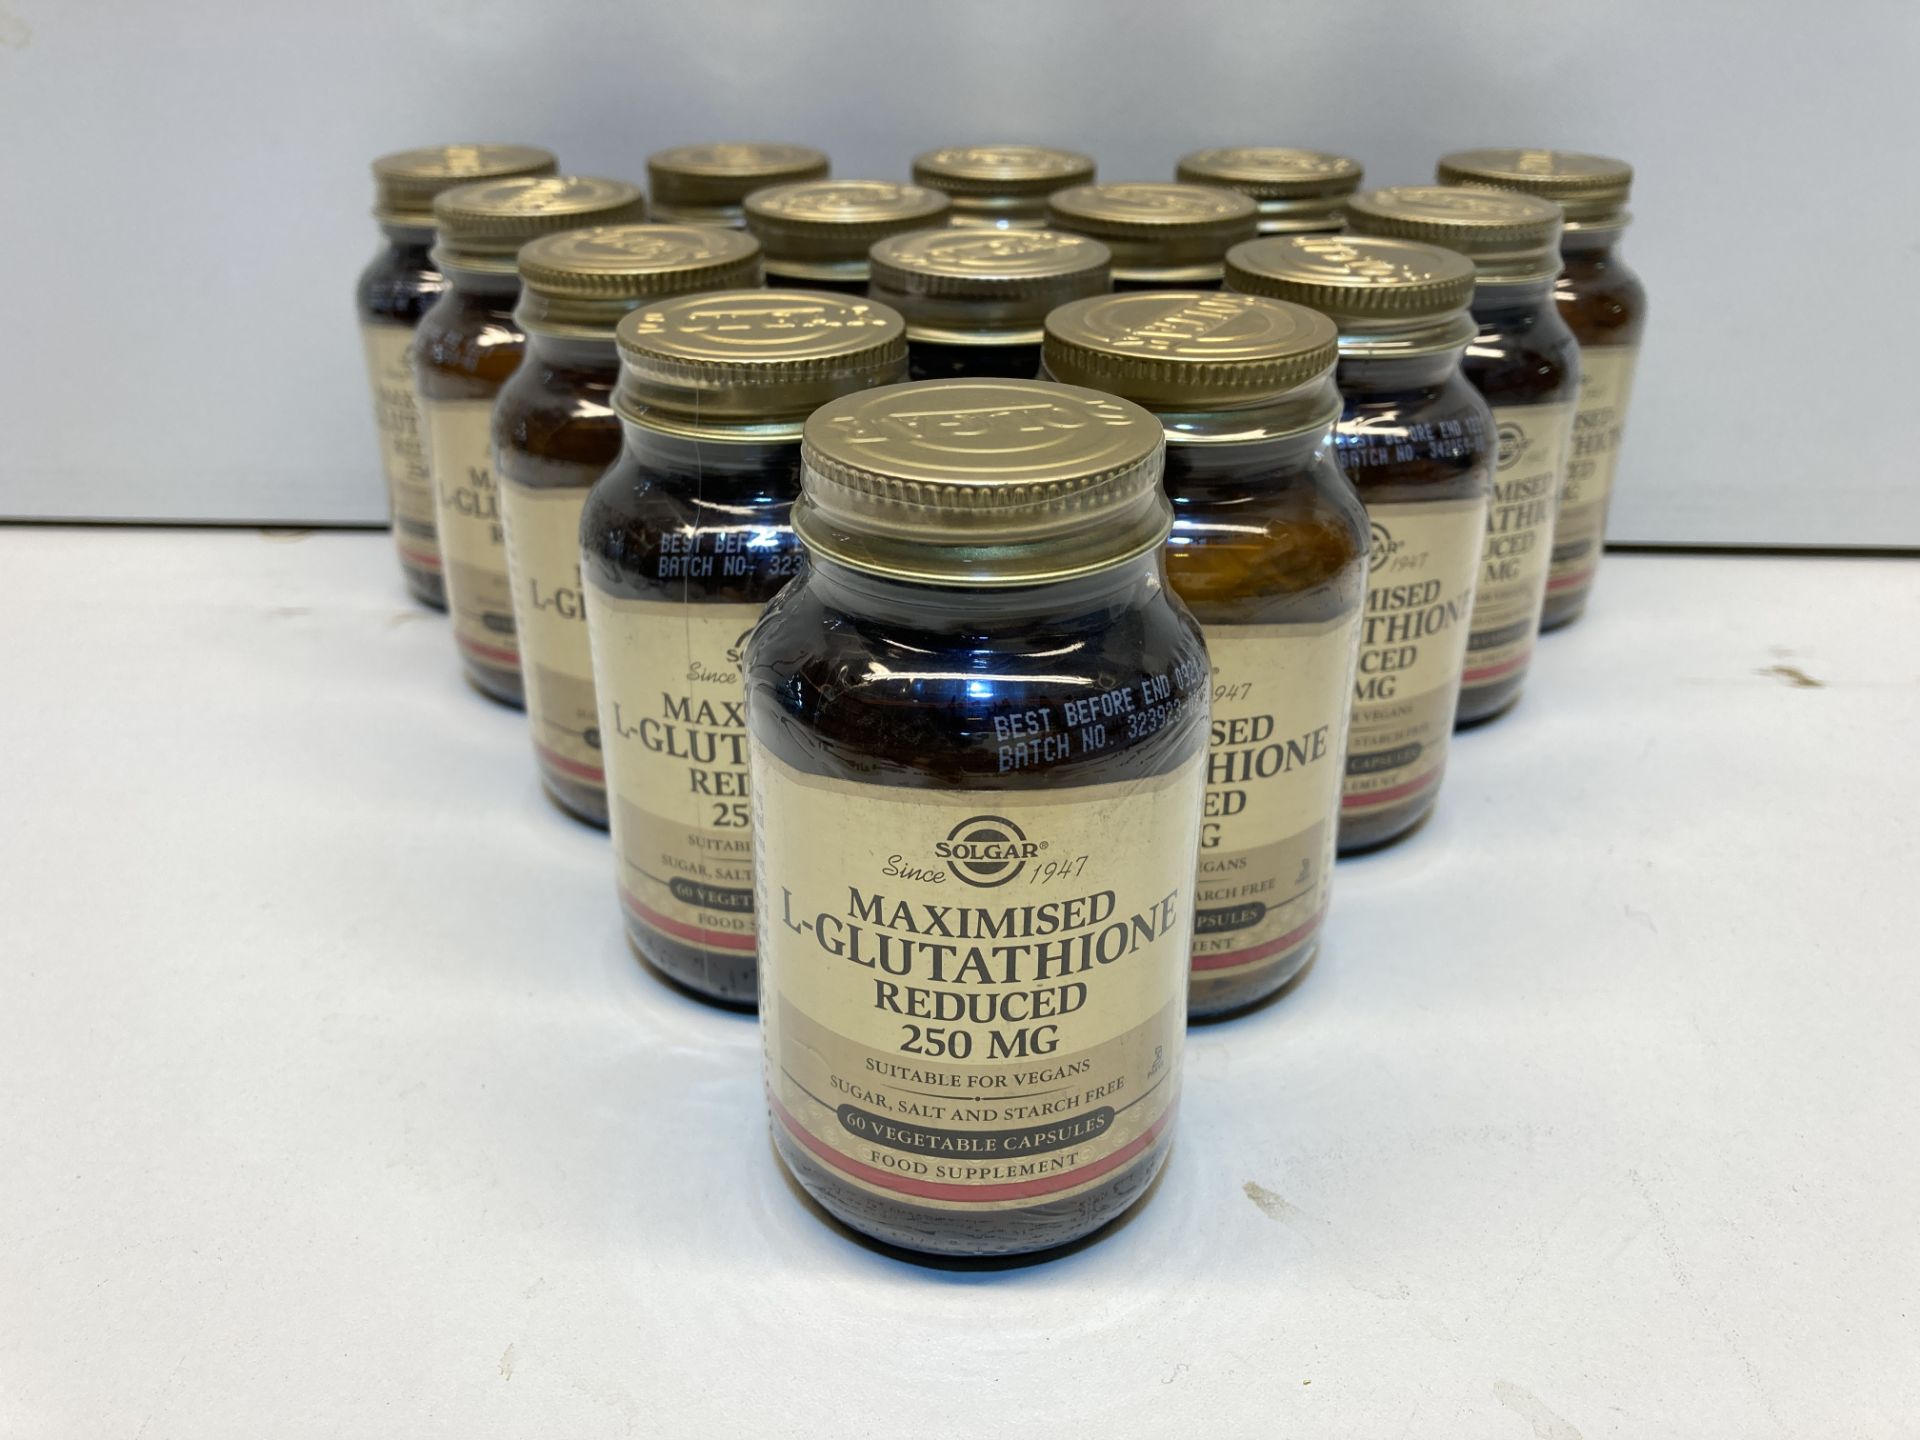 15 x Bottles of Maximised L-Glutathione Reduced 250mg Vegetable Capsules | RRP £480